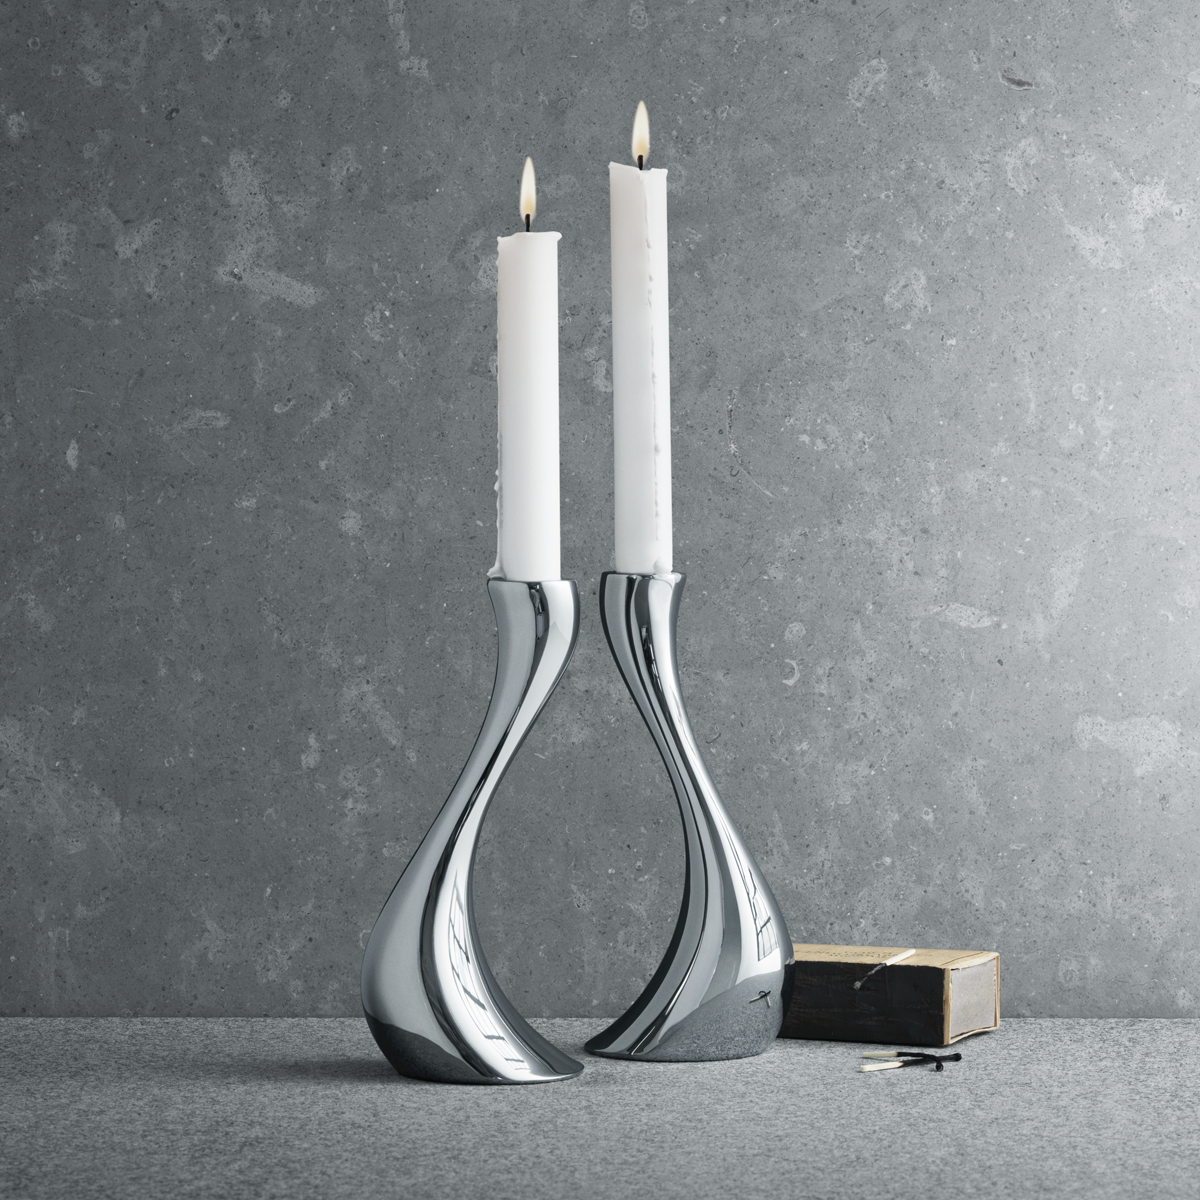 Georg Jensen Cobra Candle Holder Pair Mirror Polished Stainless Steel Small 